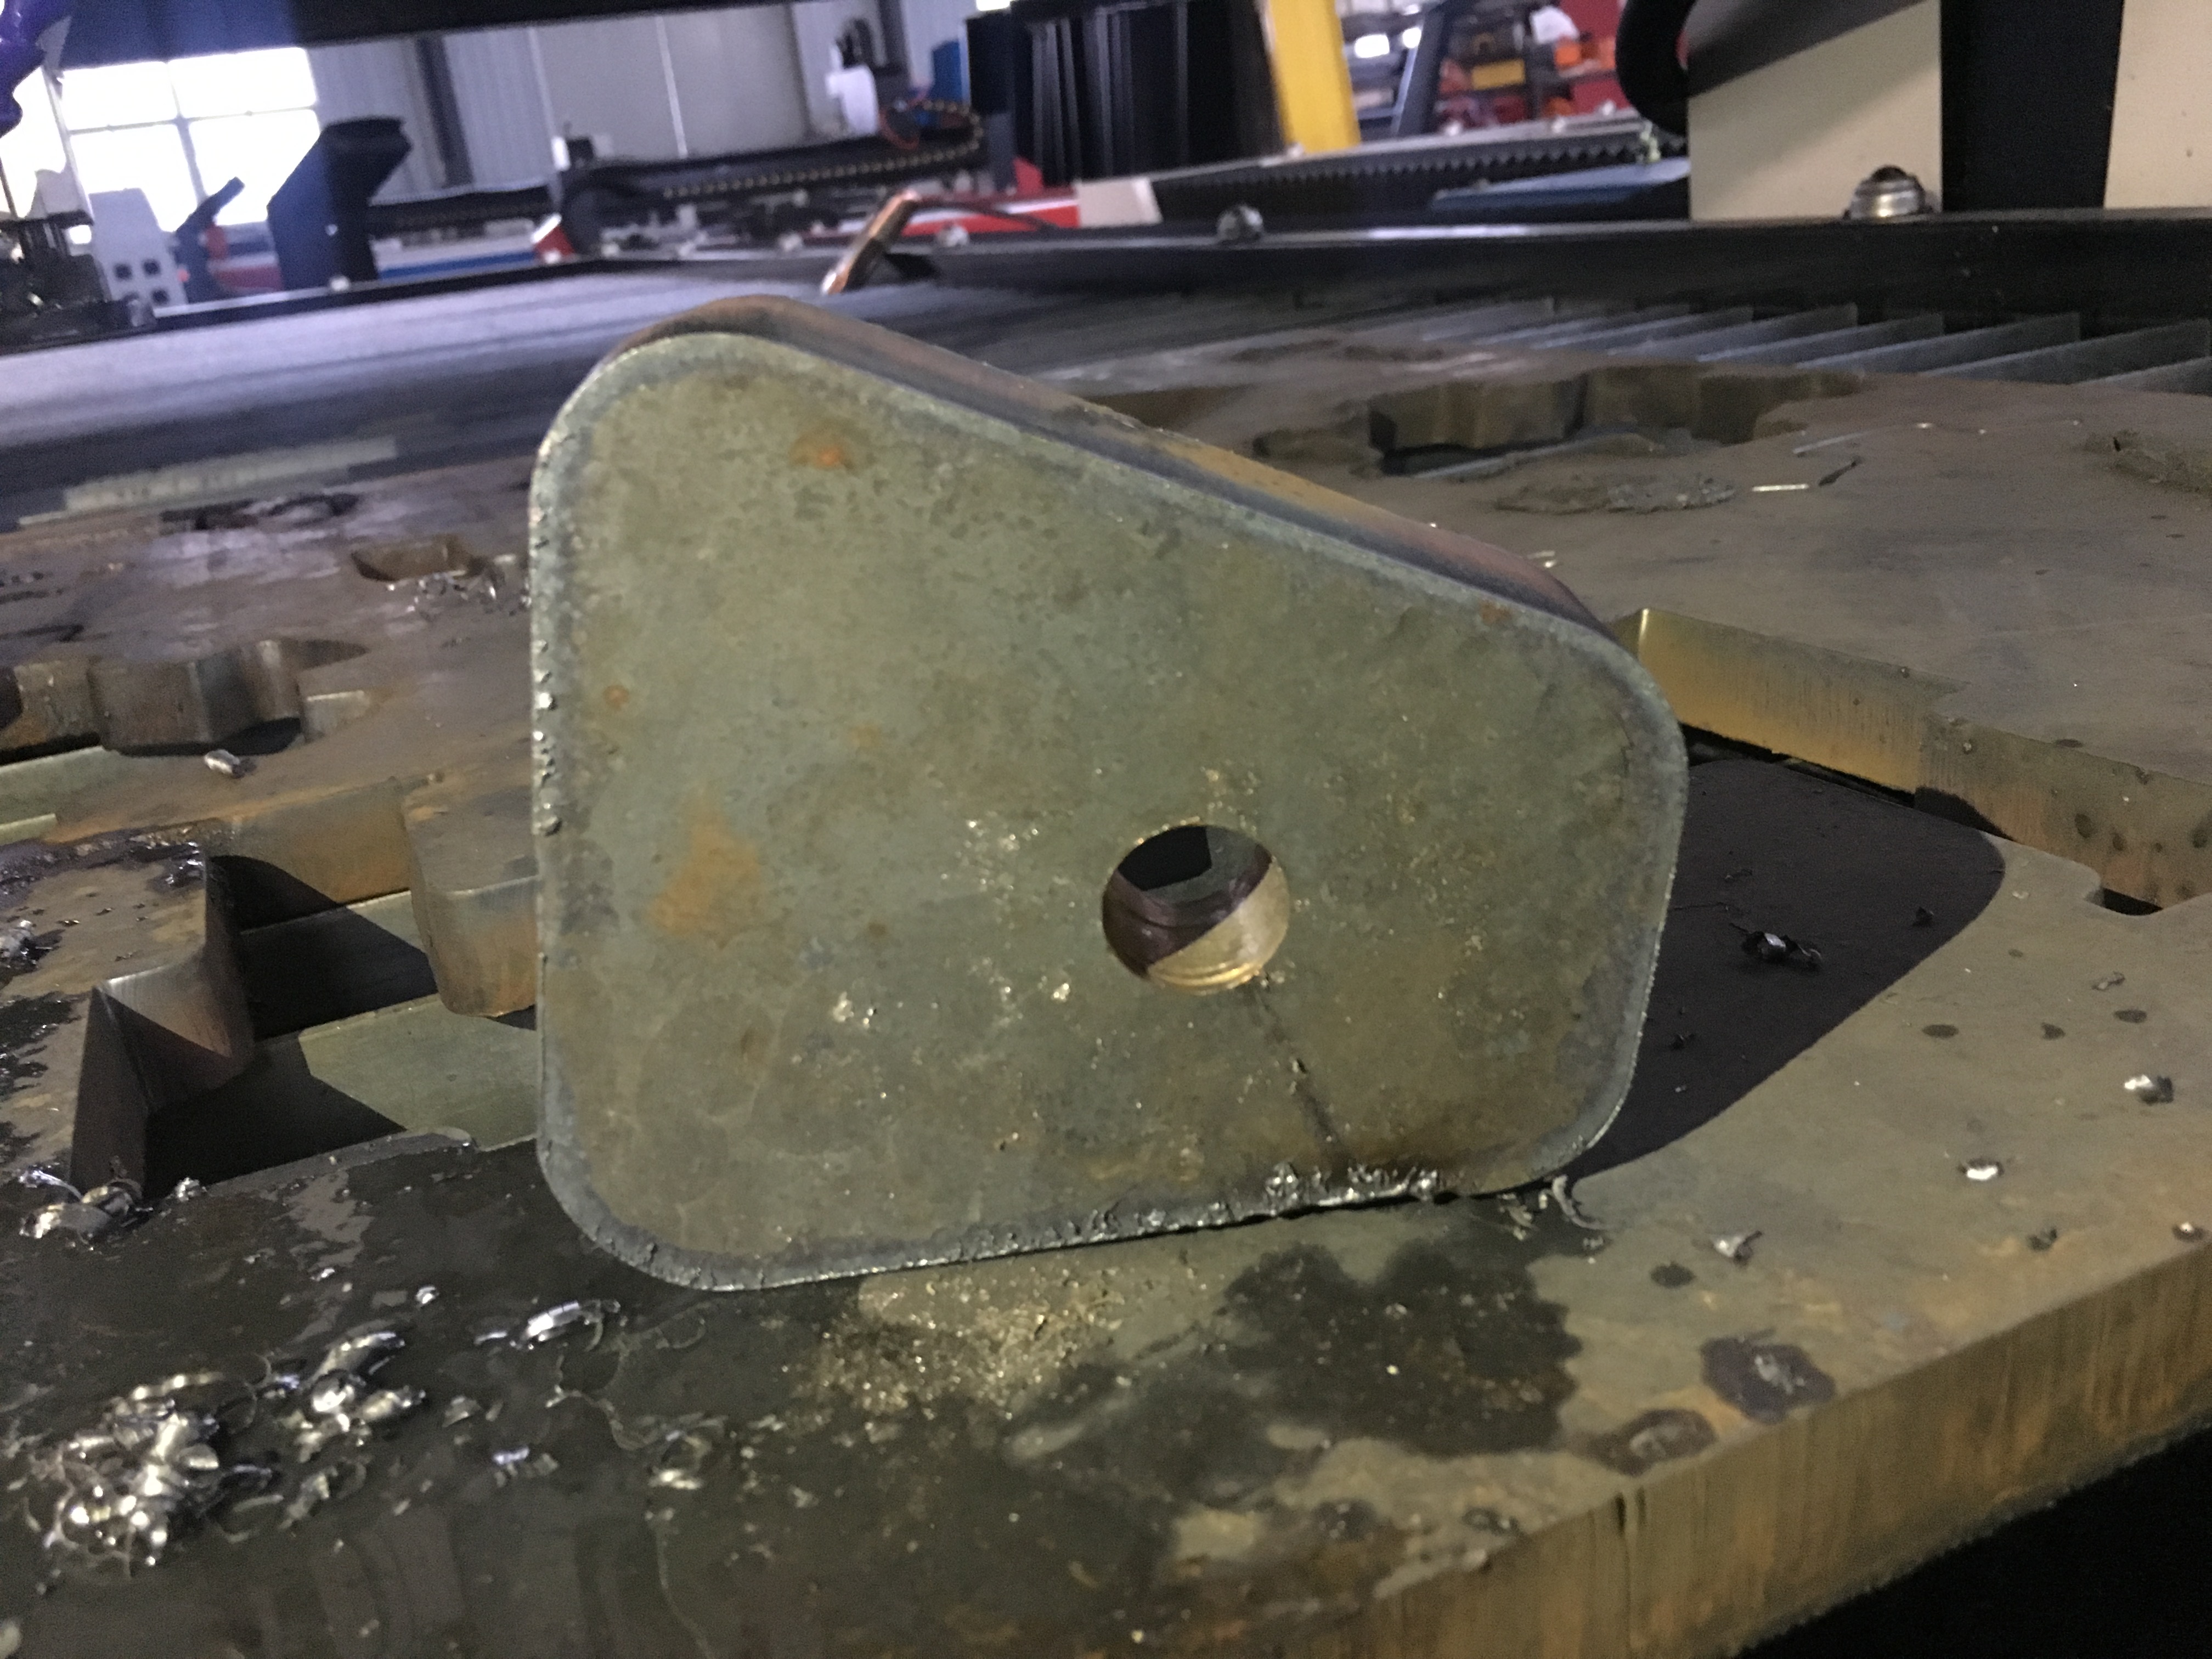 Drilling and plasma cutting hole